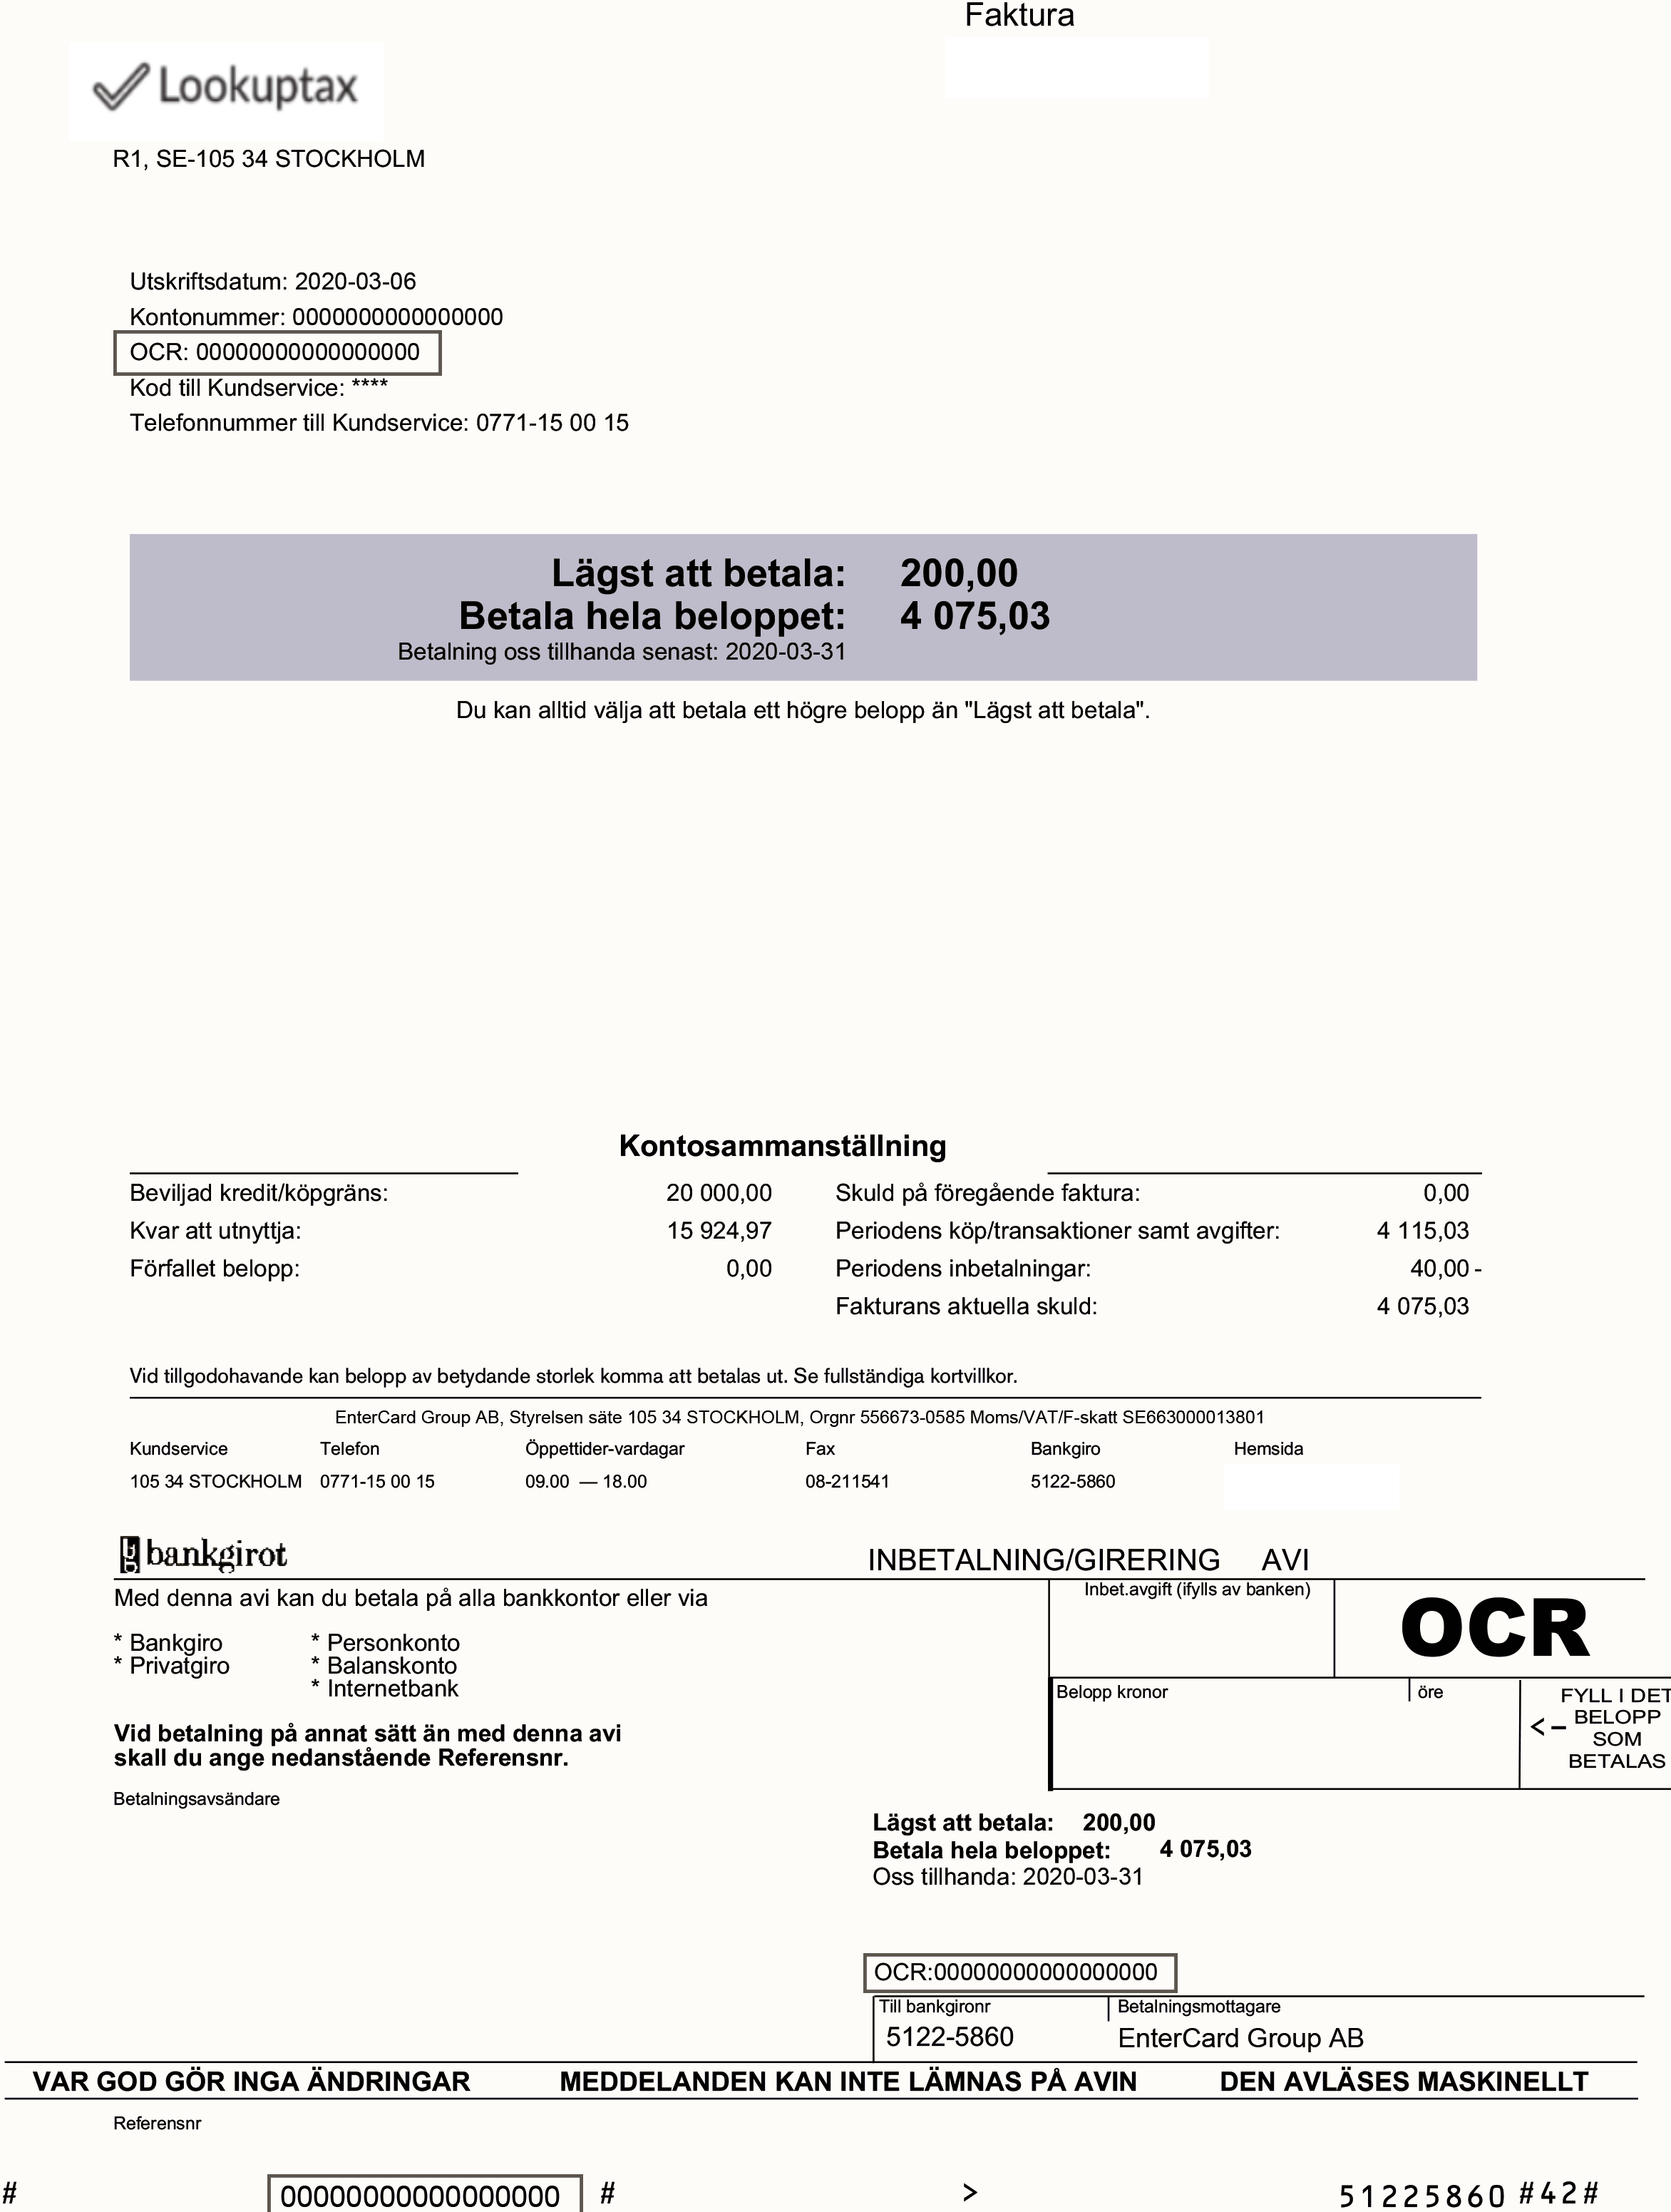 Sample Invoice with OCR number in Sweden